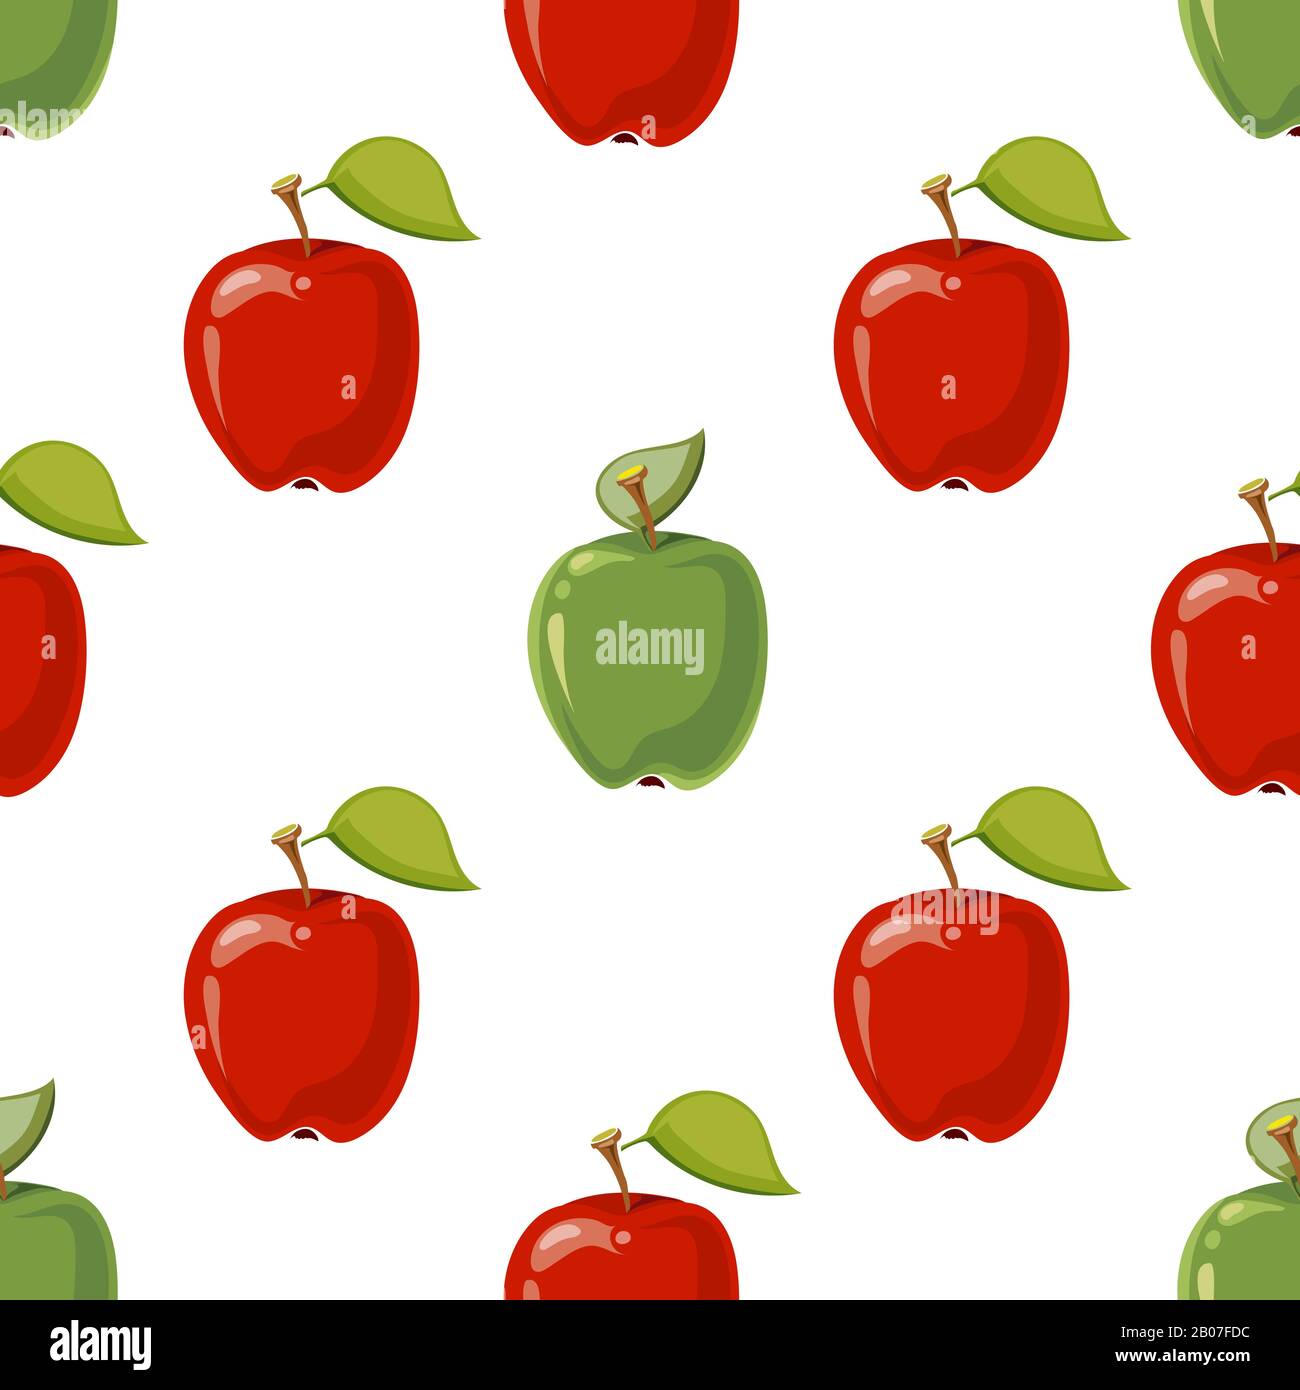 Red and green vector apples seamless pattern. Illustration of fruit background Stock Vector